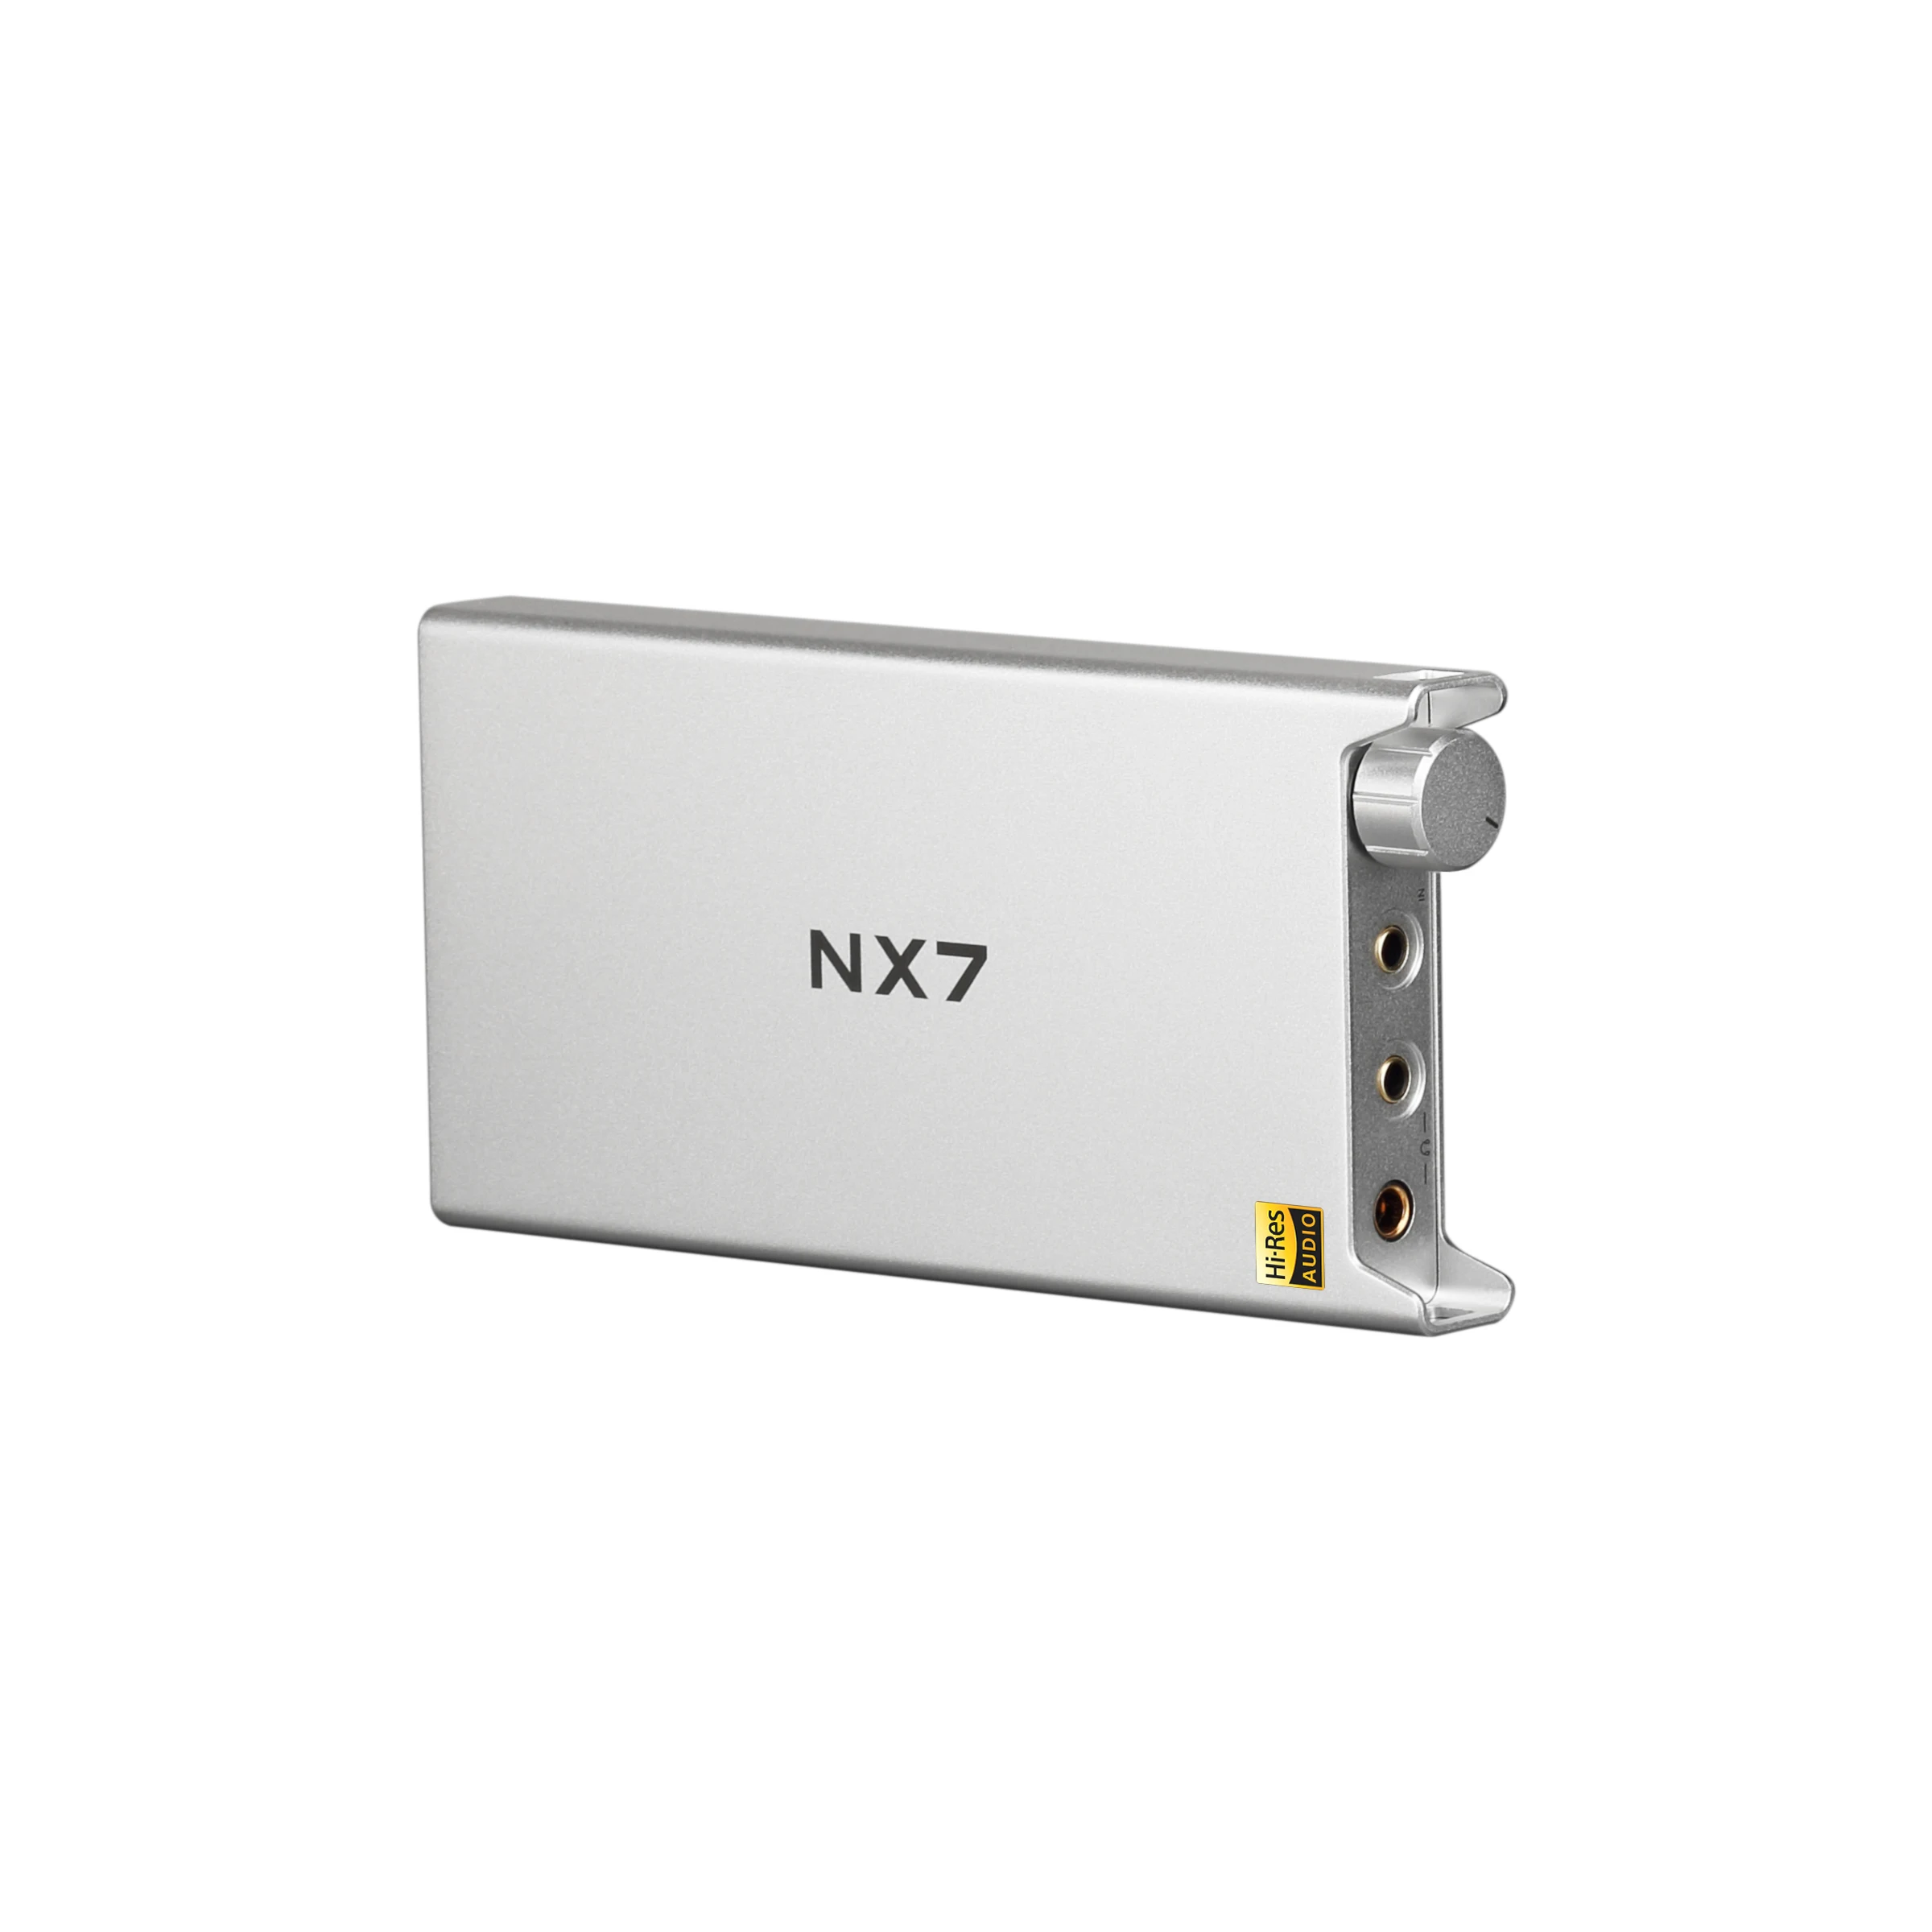 TOPPING NX7 Portable NFCA Headphone Amplifier 1400mW Output Power with 3.5mm 4.4mm Port 20H Battery Life